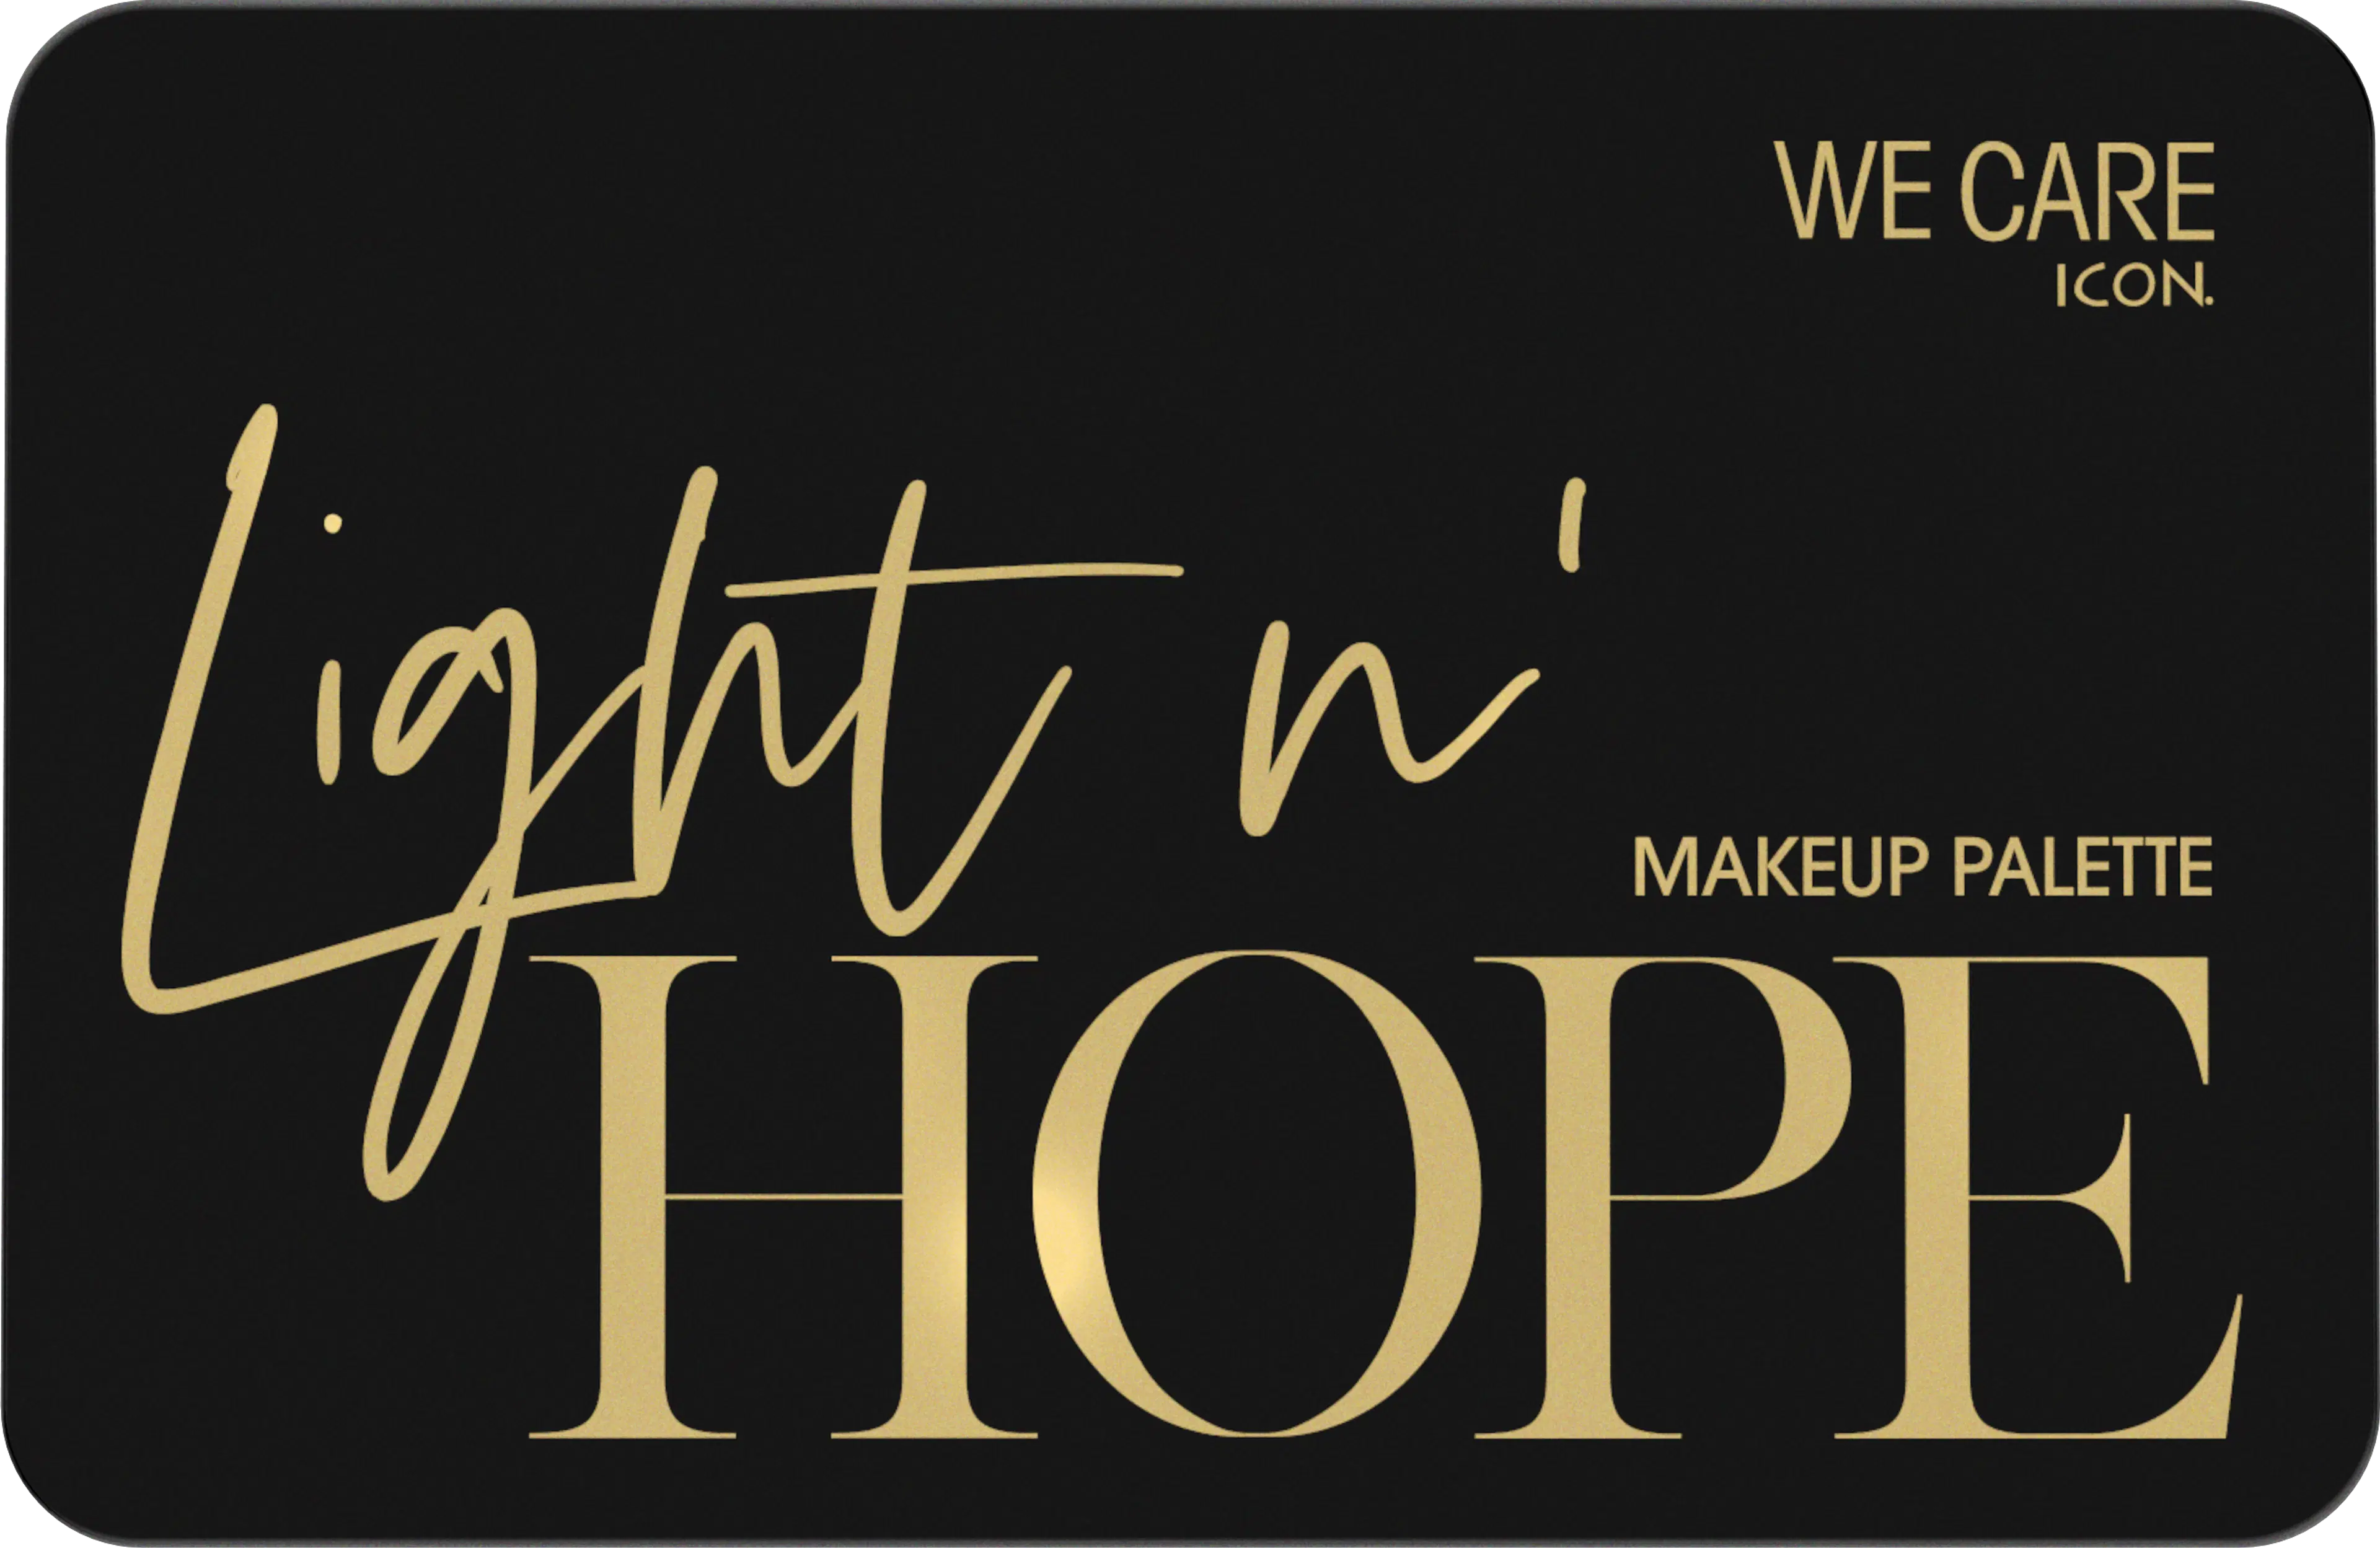 We Care Icon Light n' Hope Makeup Palette meikkipaletti